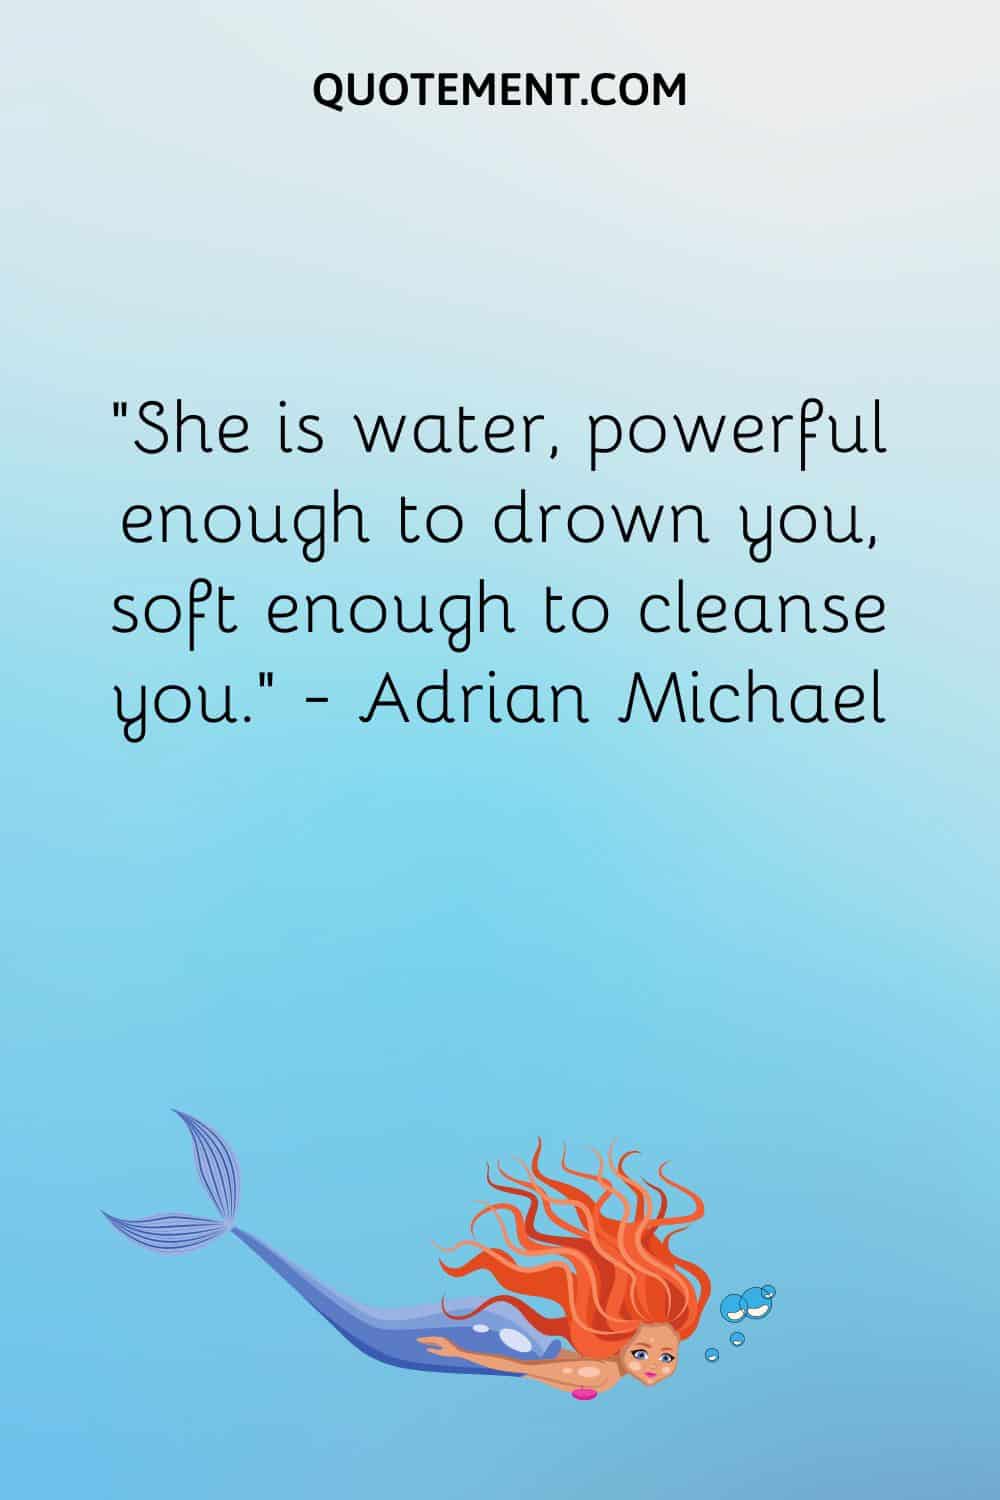 “She is water, powerful enough to drown you, soft enough to cleanse you.” ― Adrian Michael